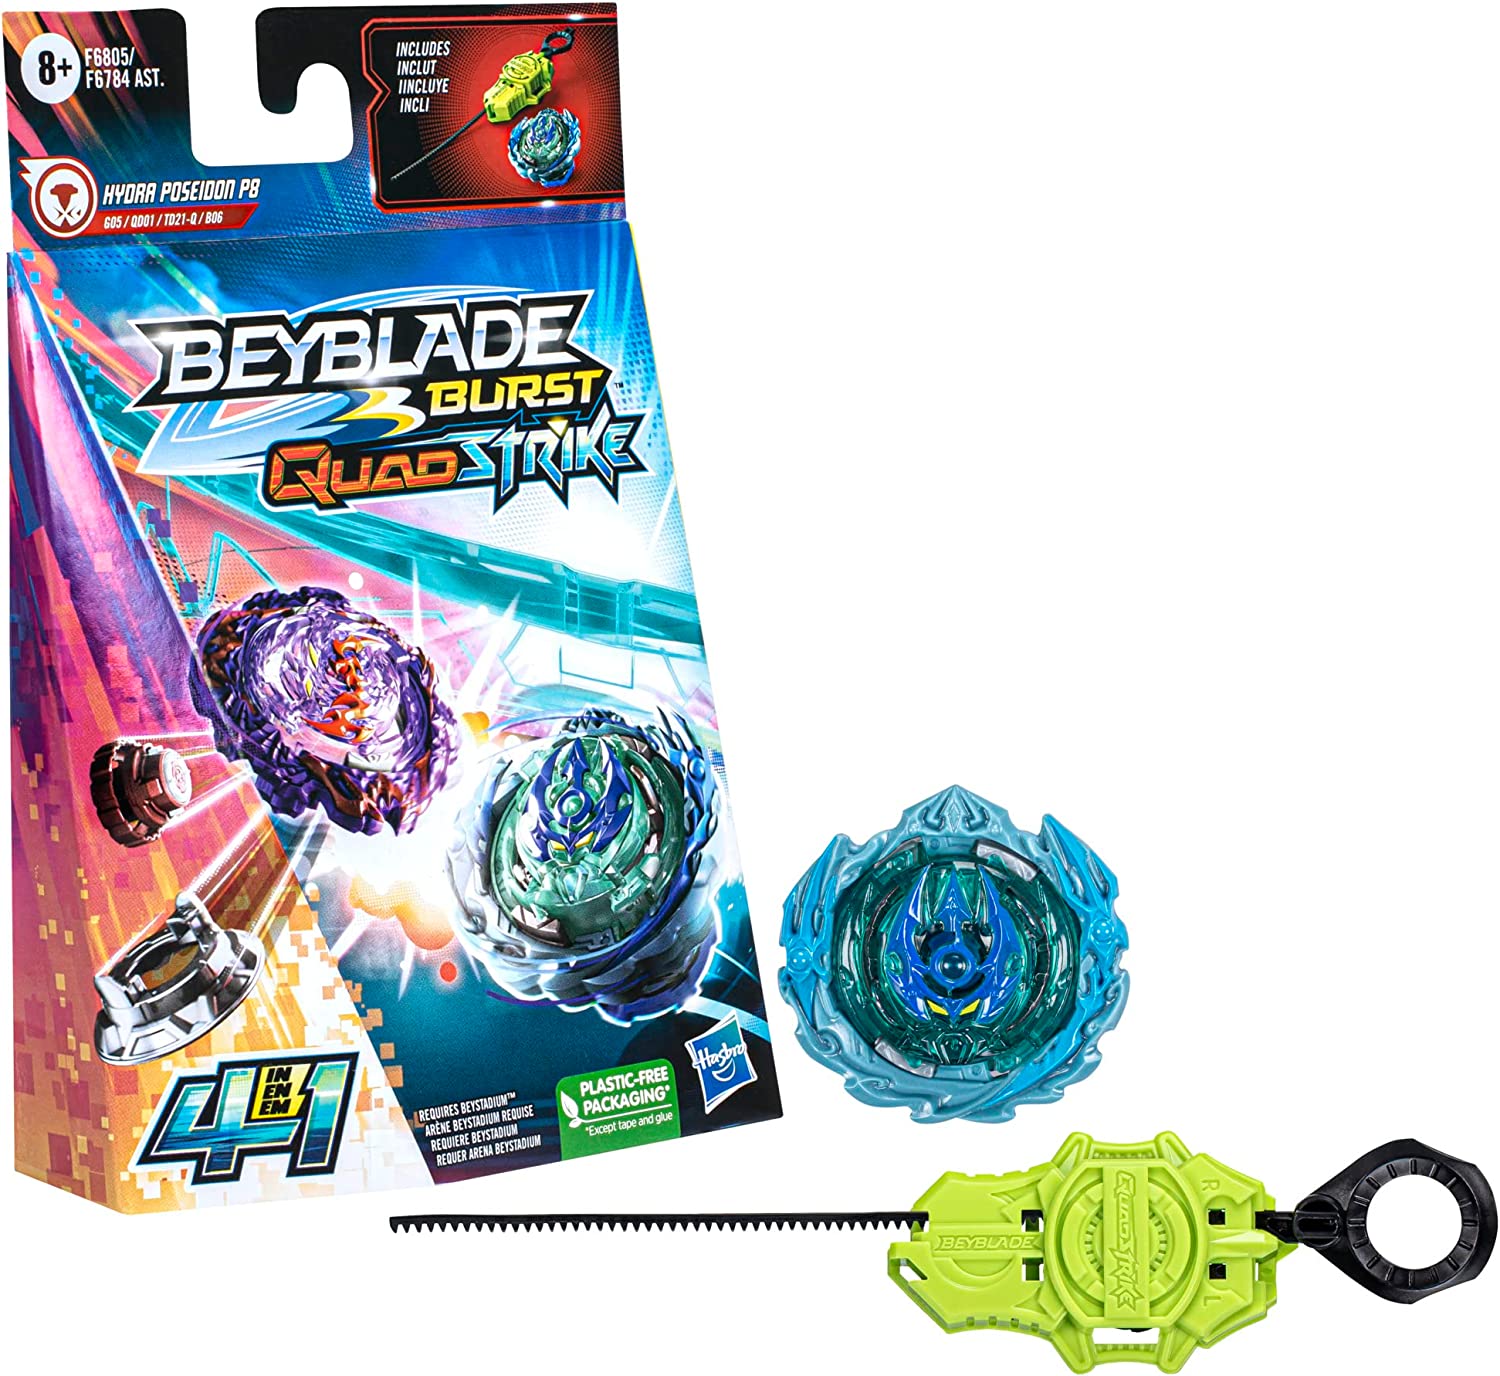 Beyblade Burst B169 B170 Metal Blade Launchers Ultimate Kids Toy Gift ▻   ▻ Free Shipping ▻ Up to 70% OFF